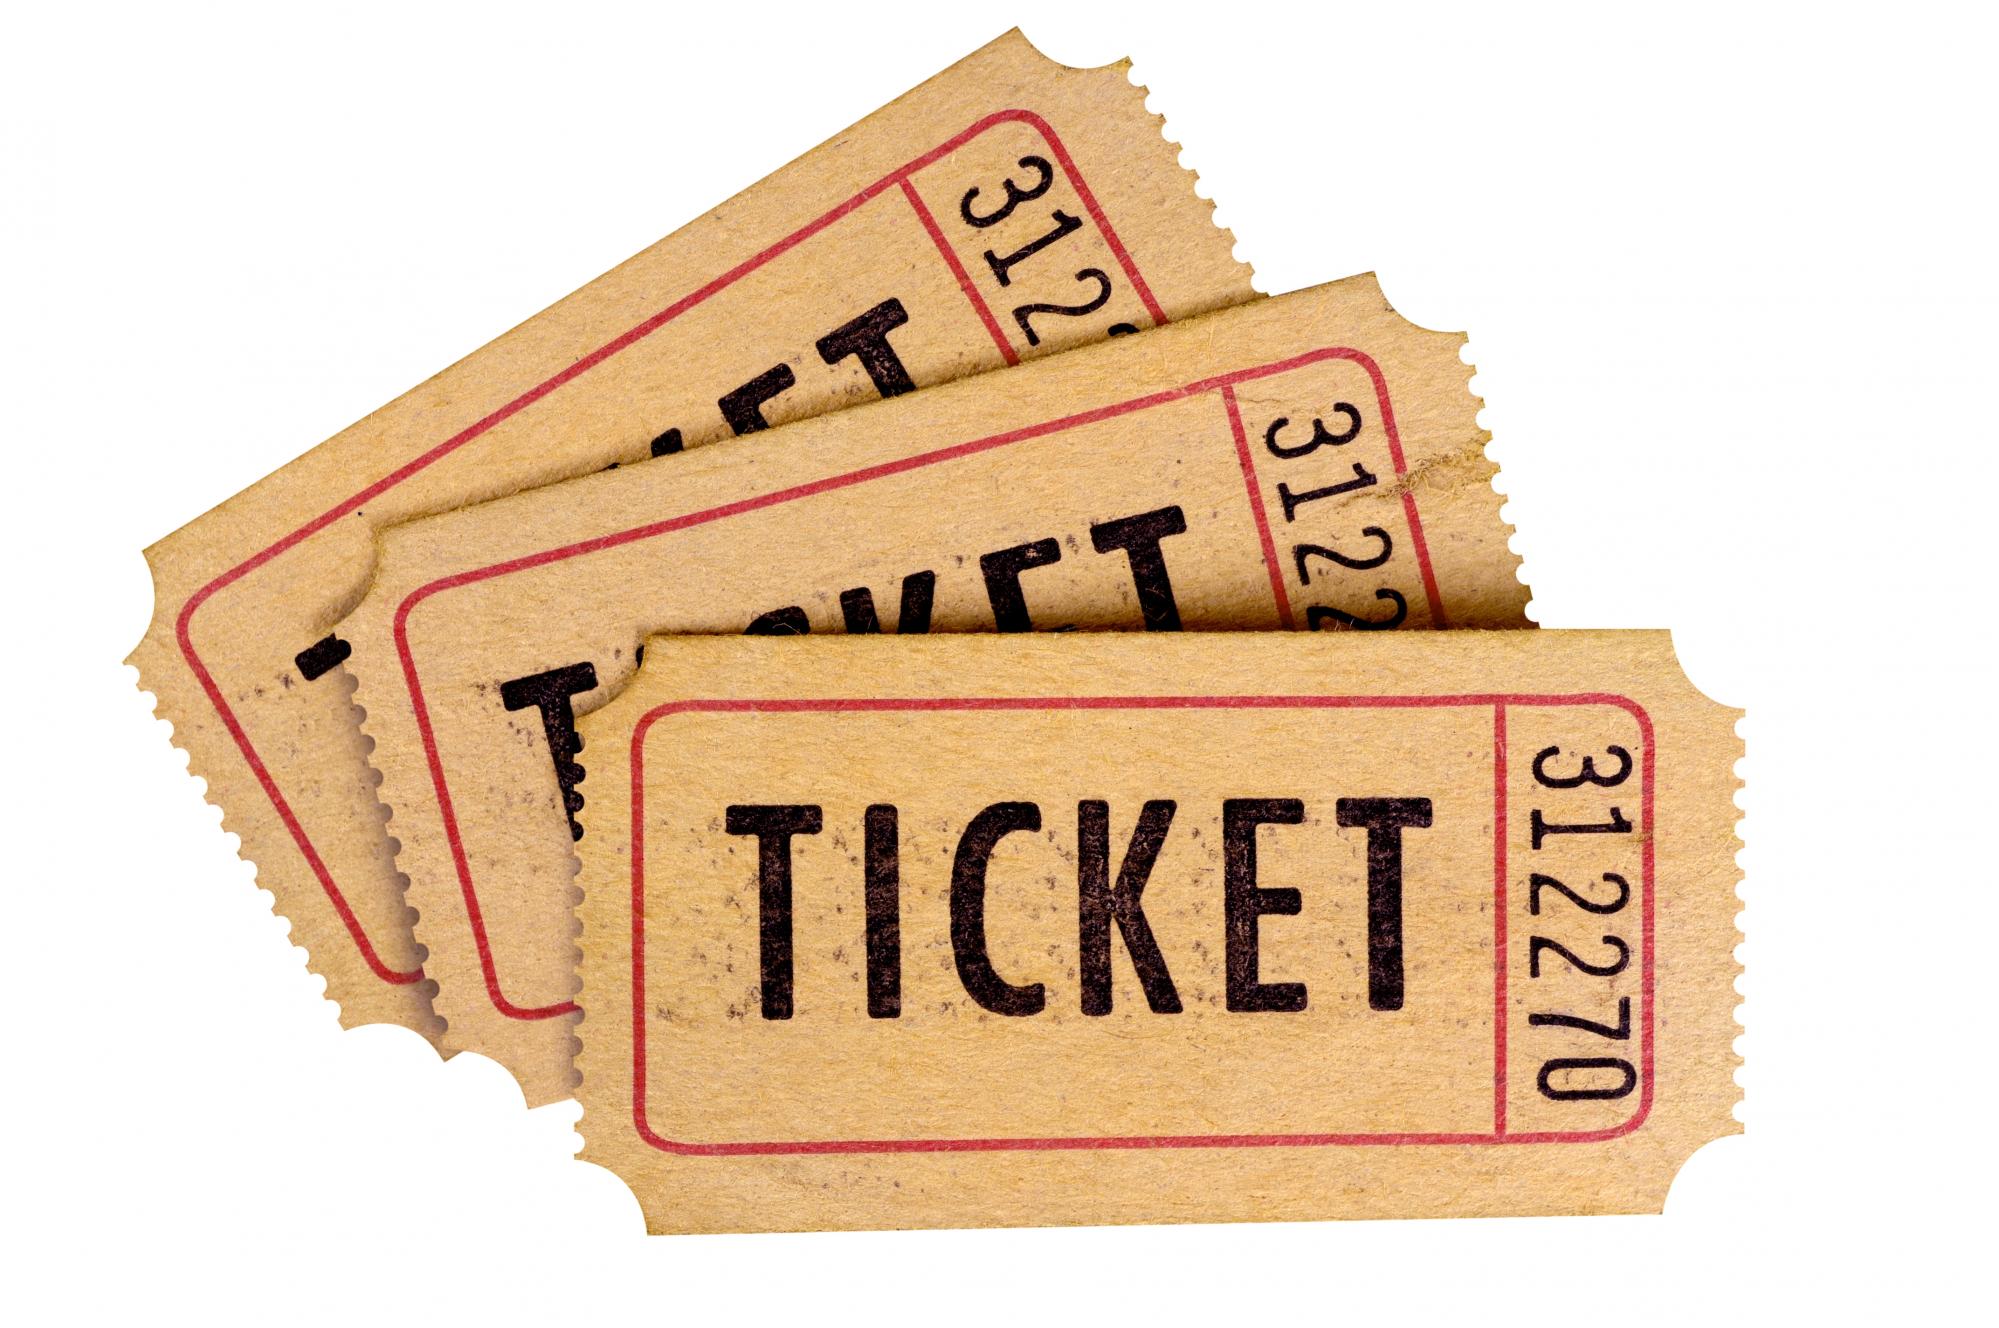 Old tickets isolated on a white background.